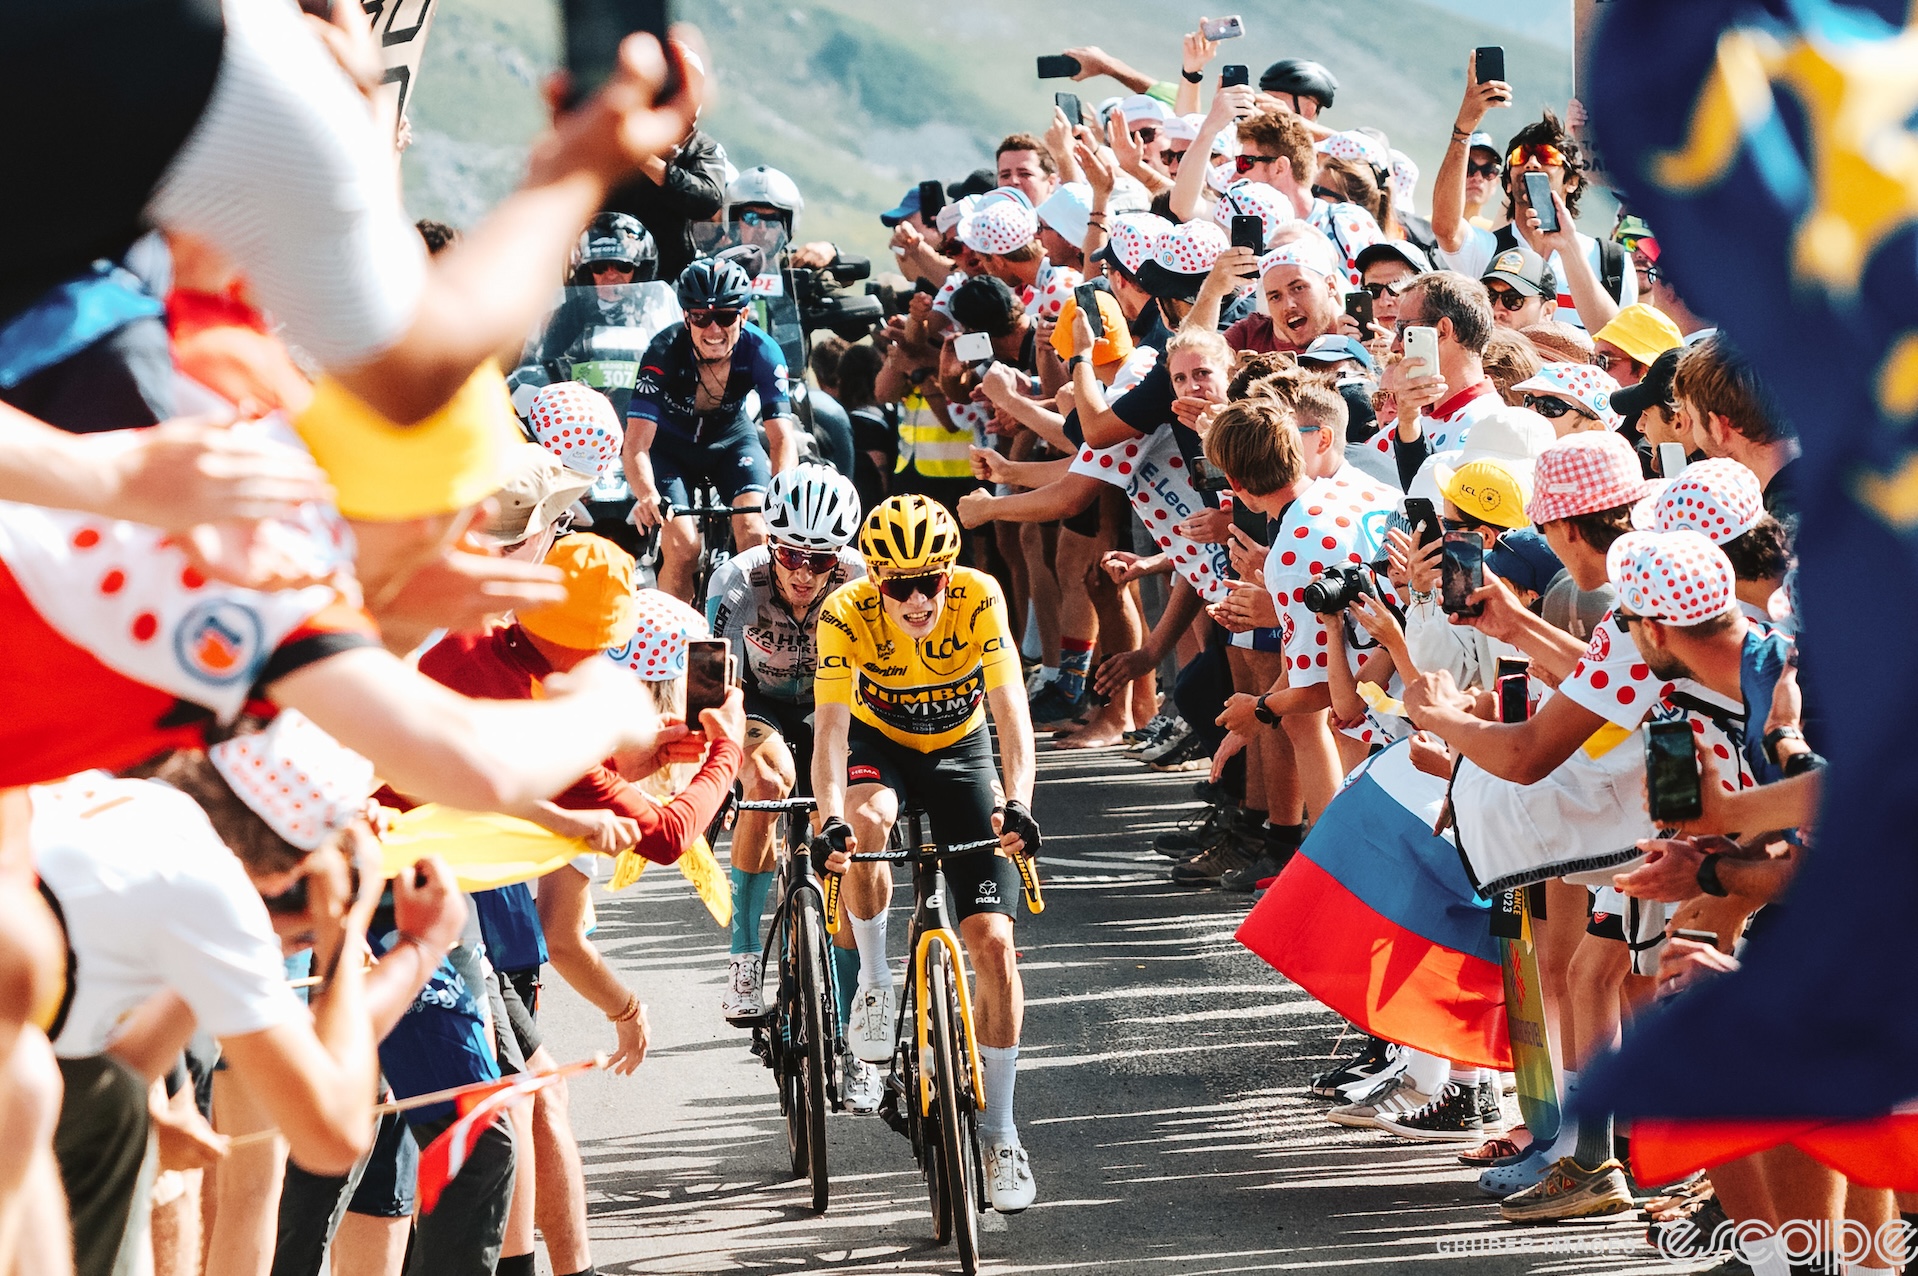 Jonas Vingegaard climbs the Col de la Loze on stage 17 of the 2023 Tour de France. He has Pello Bilbao behind him with David Gaudu a few meters behind, and they are surrounded by masses of flag-waving fans.